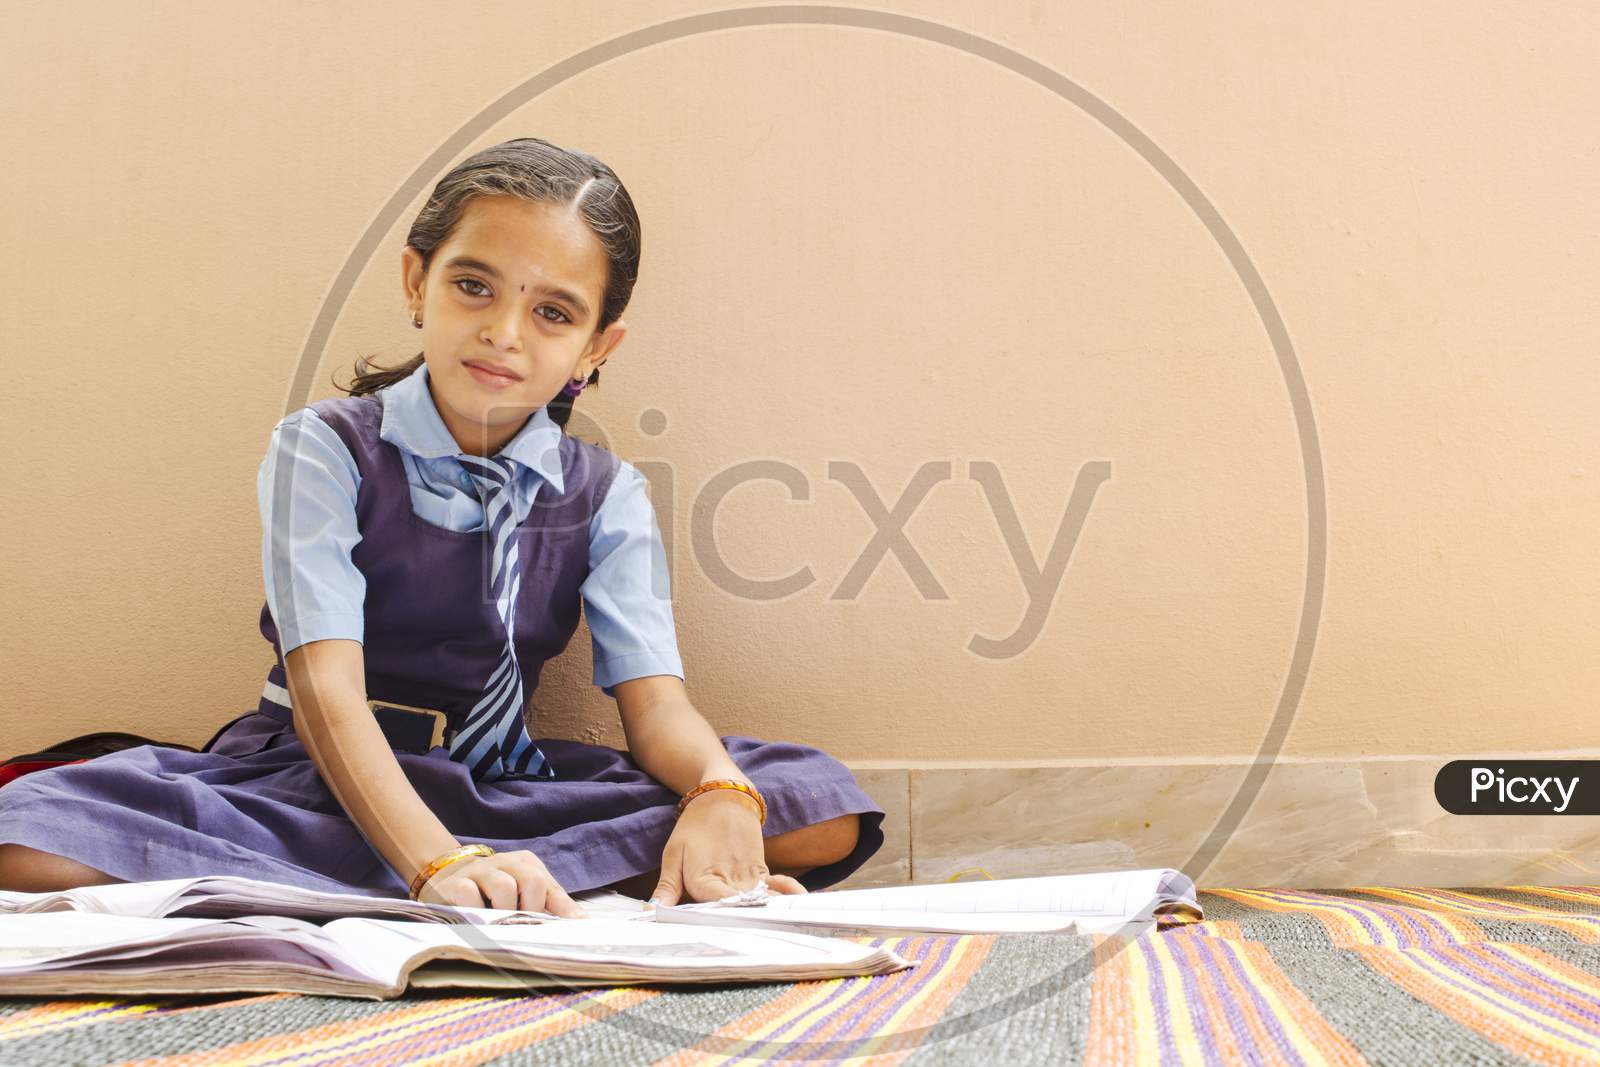 A Beautiful Young Girl Reading With School Dress At Home - School Kid Doing Home Work - Girl Kid With Books And Uniform.